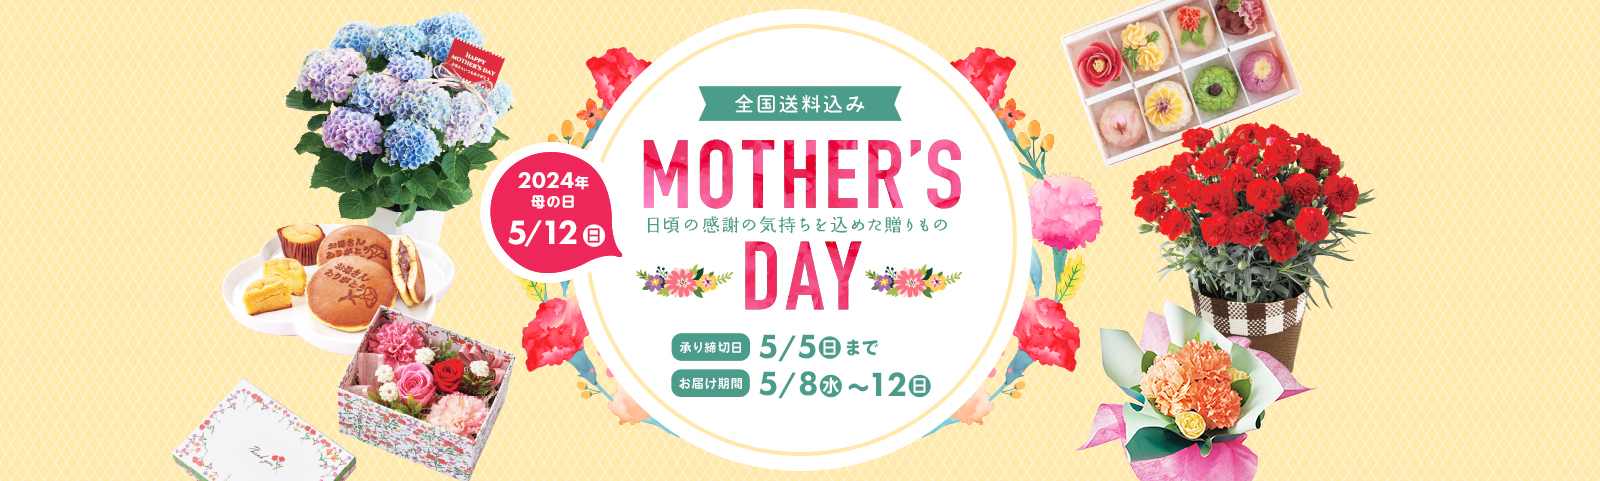 Mother's Day 日頃の感謝の気持ちを込めた贈り物 2024年母の日5月12日日曜日 全国送料込み 承り締切日 5月5日日曜日まで お届け期間 5月8日水曜日から12日日曜日まで